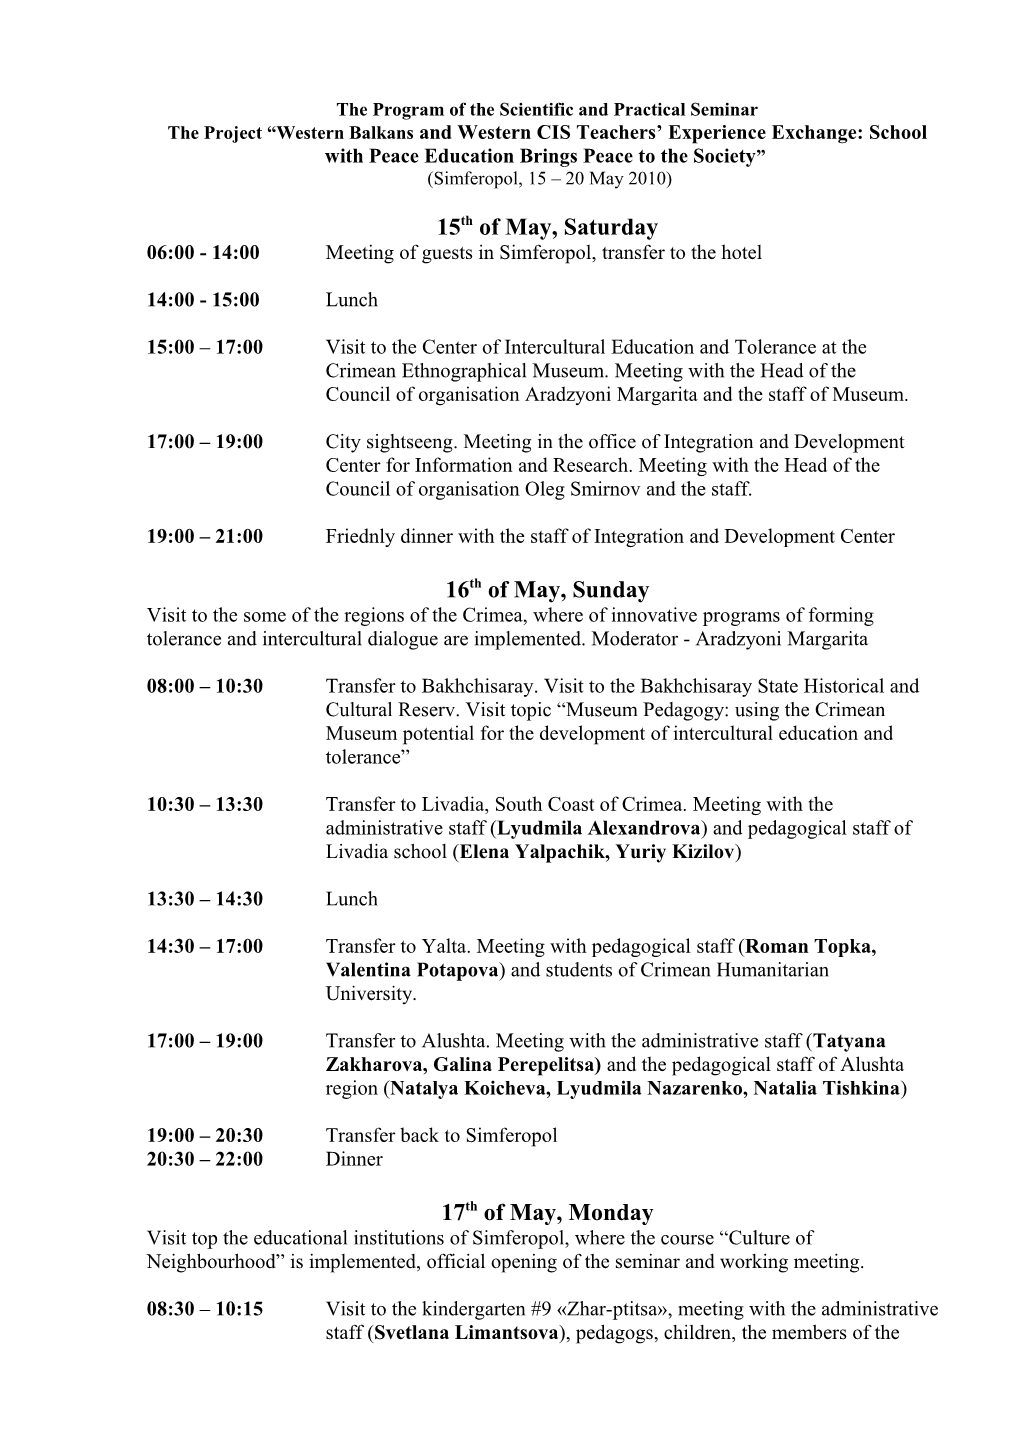 The Program of the Scientific and Practical Seminar